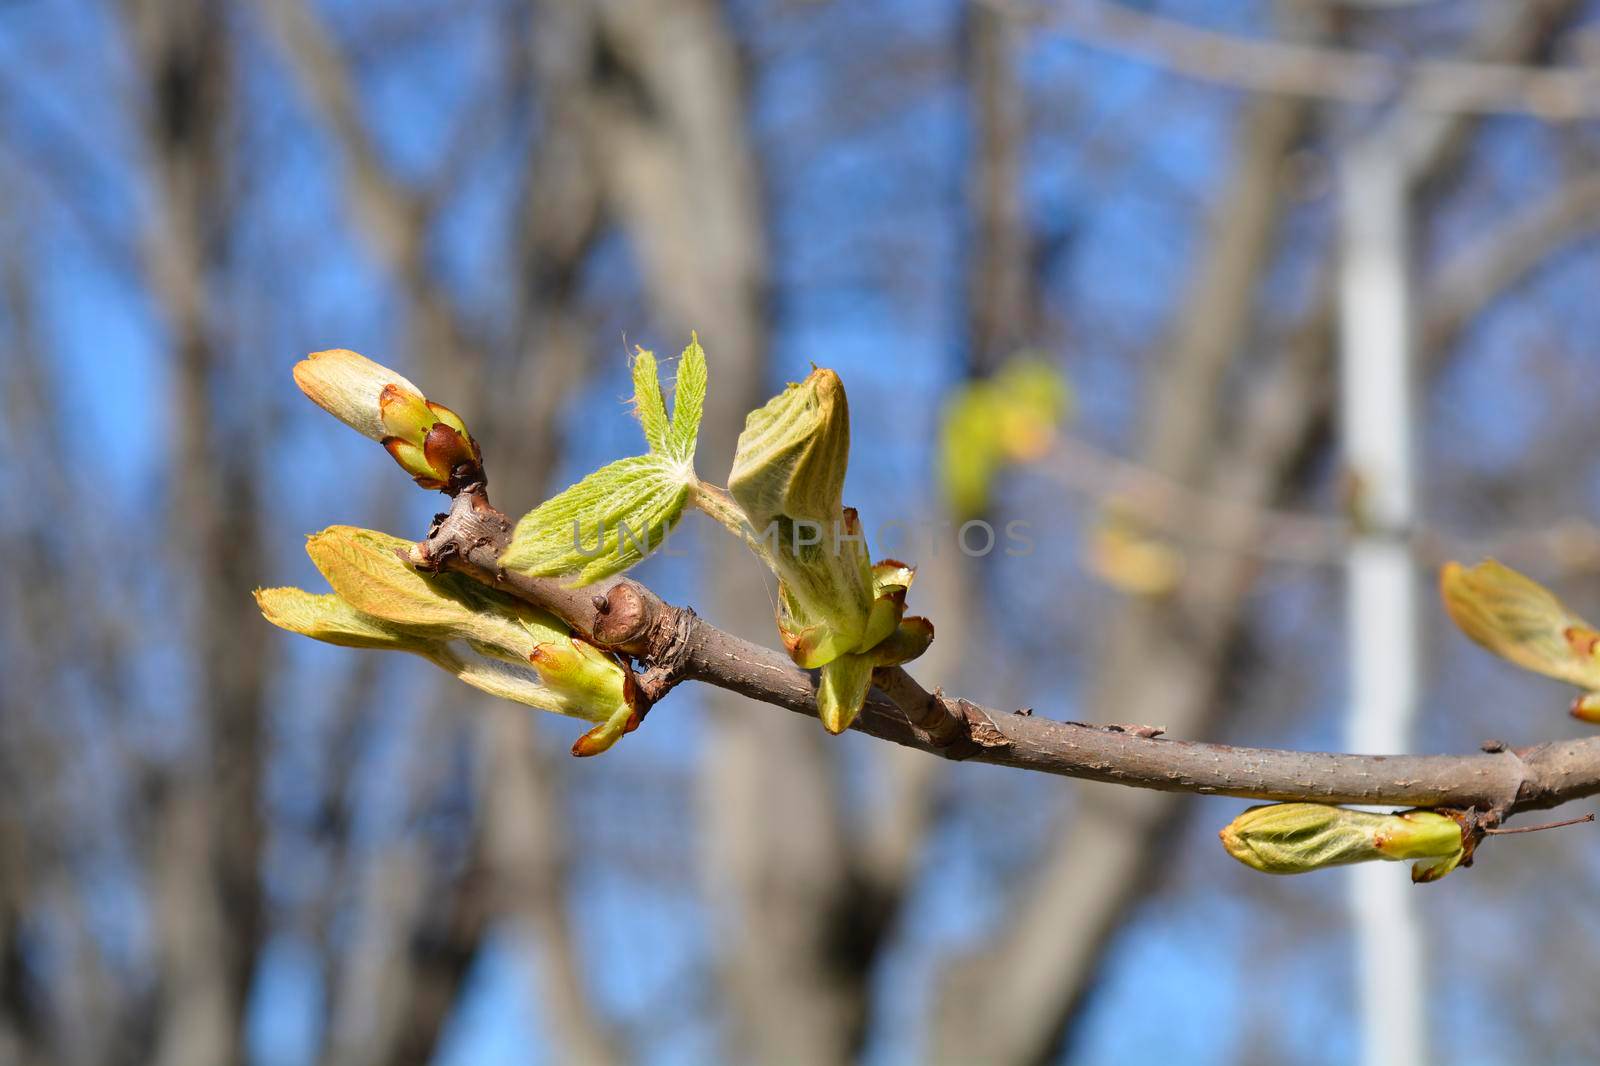 Common horse chestnut branches with leaf buds - Latin name - Aesculus hippocastanum